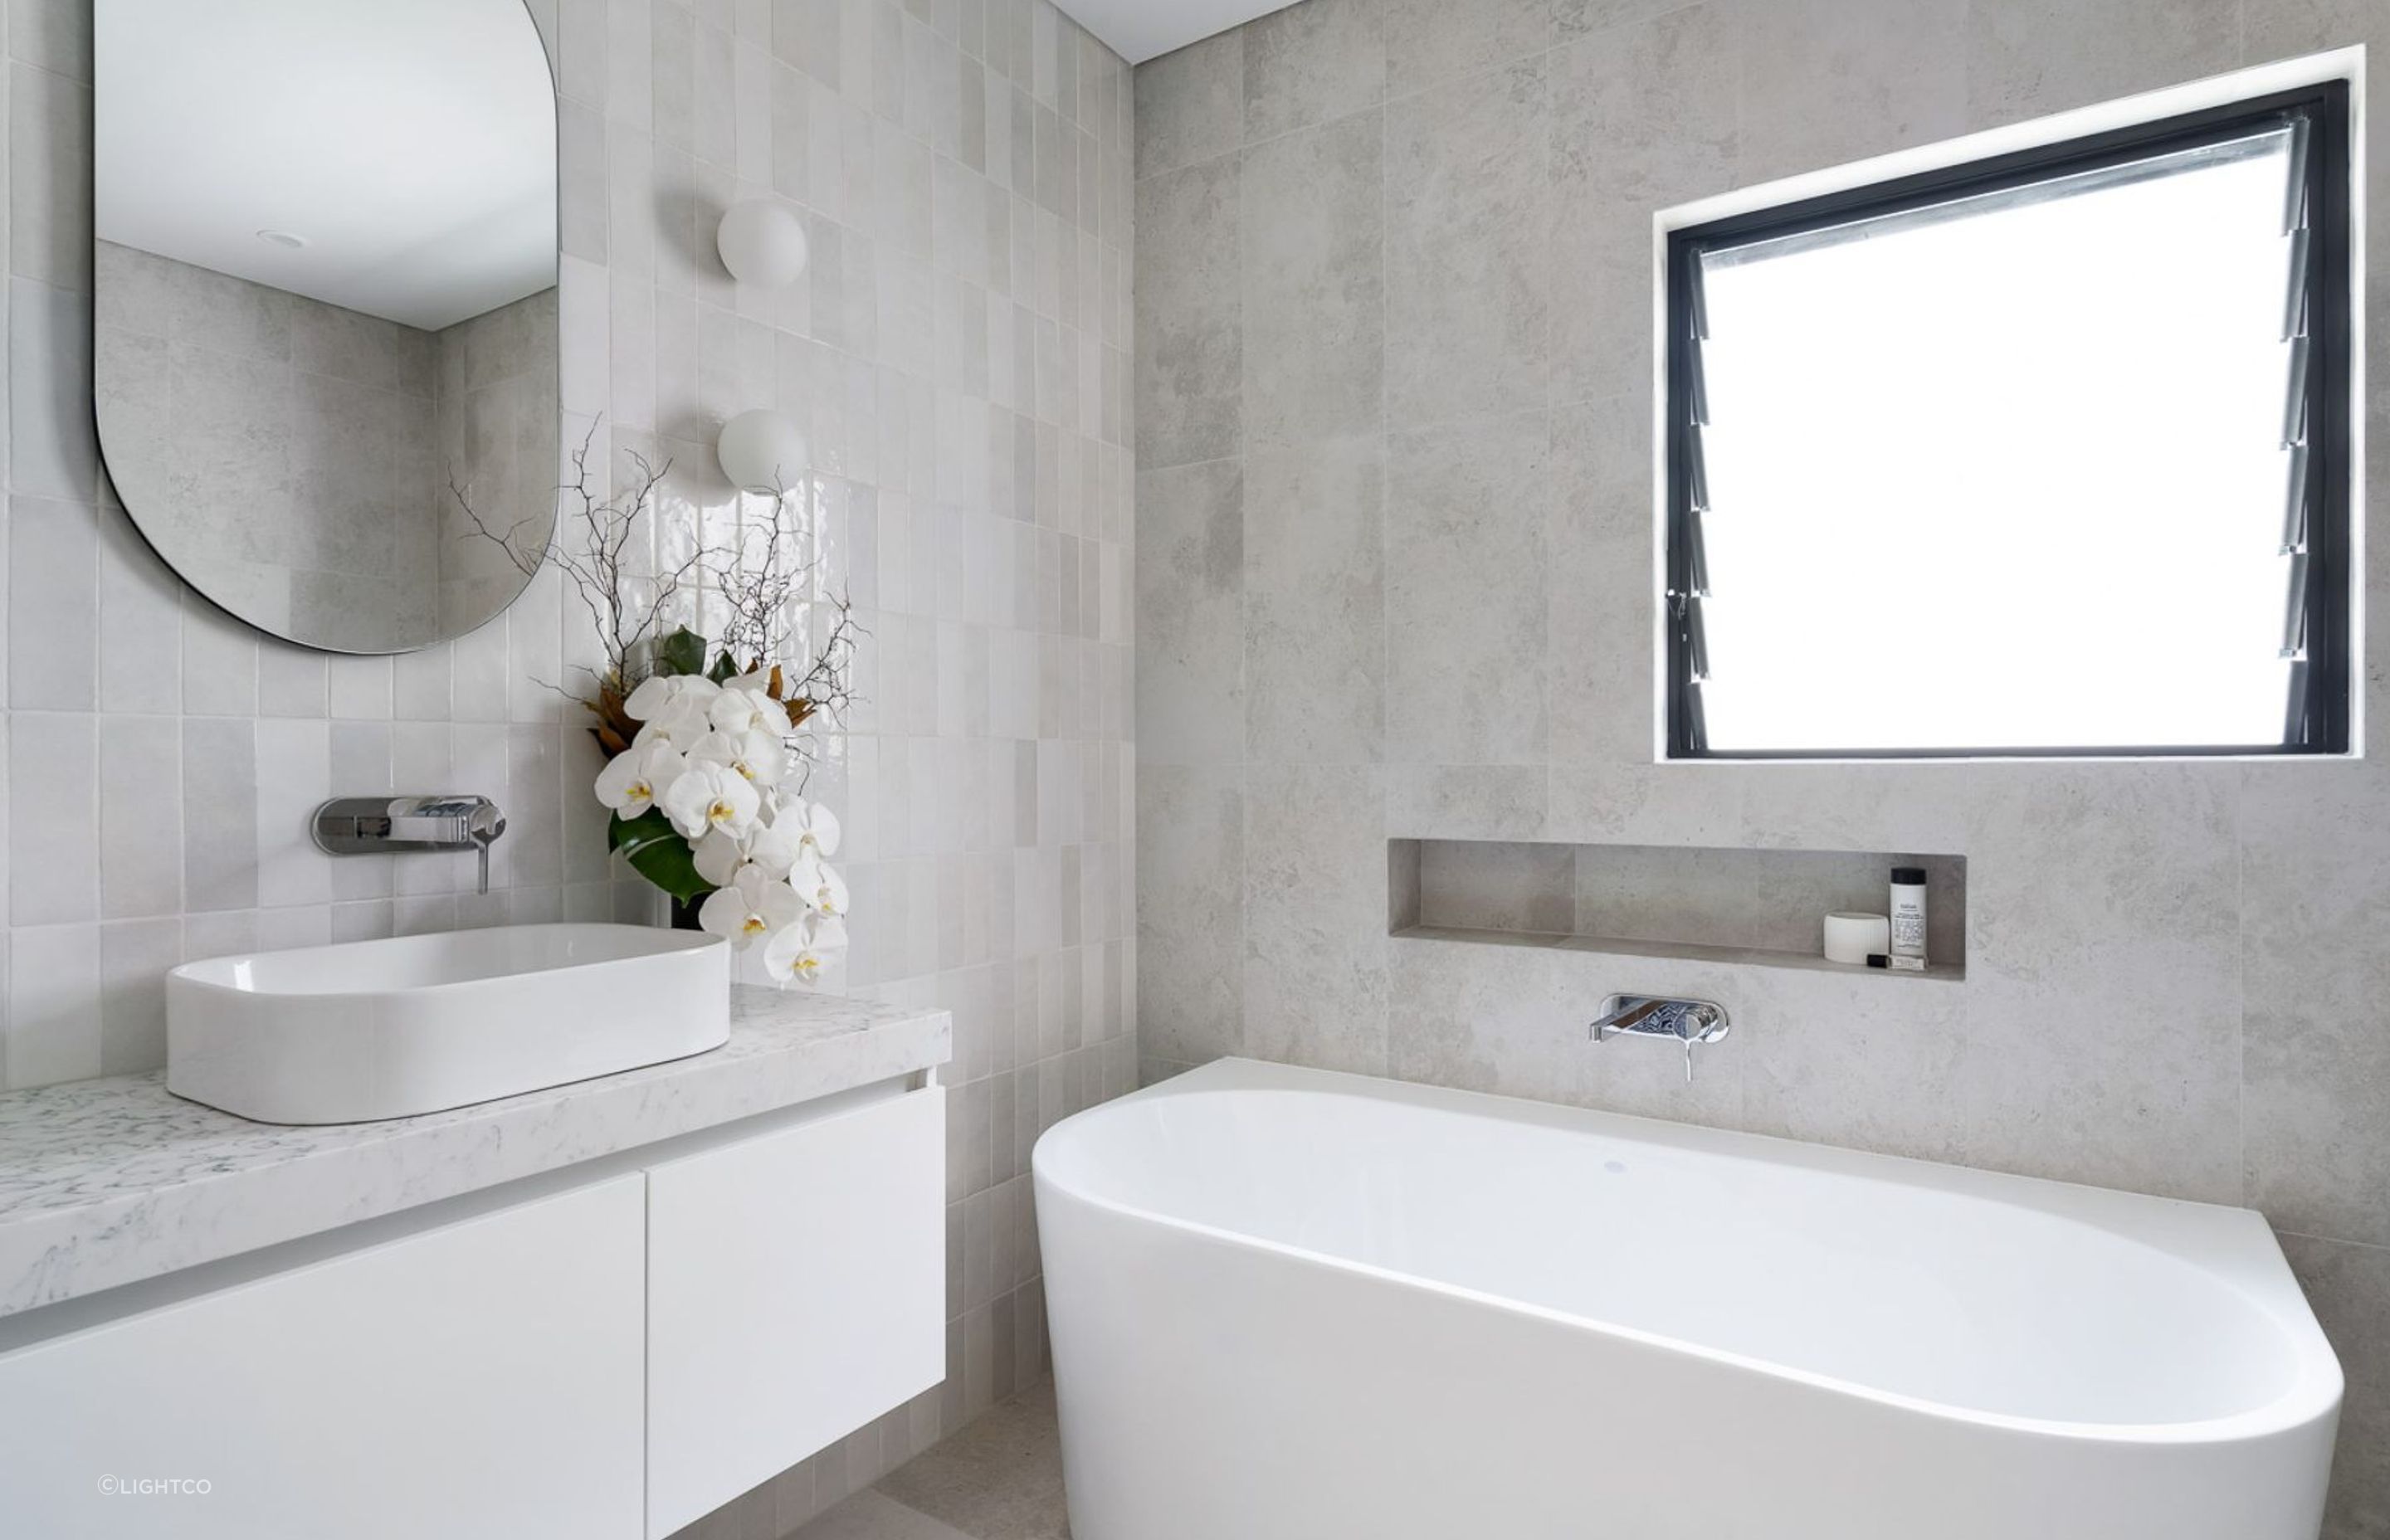 An exquisite orchid elevates this bathroom in Rose Bay - Photography: Rebecca Lu